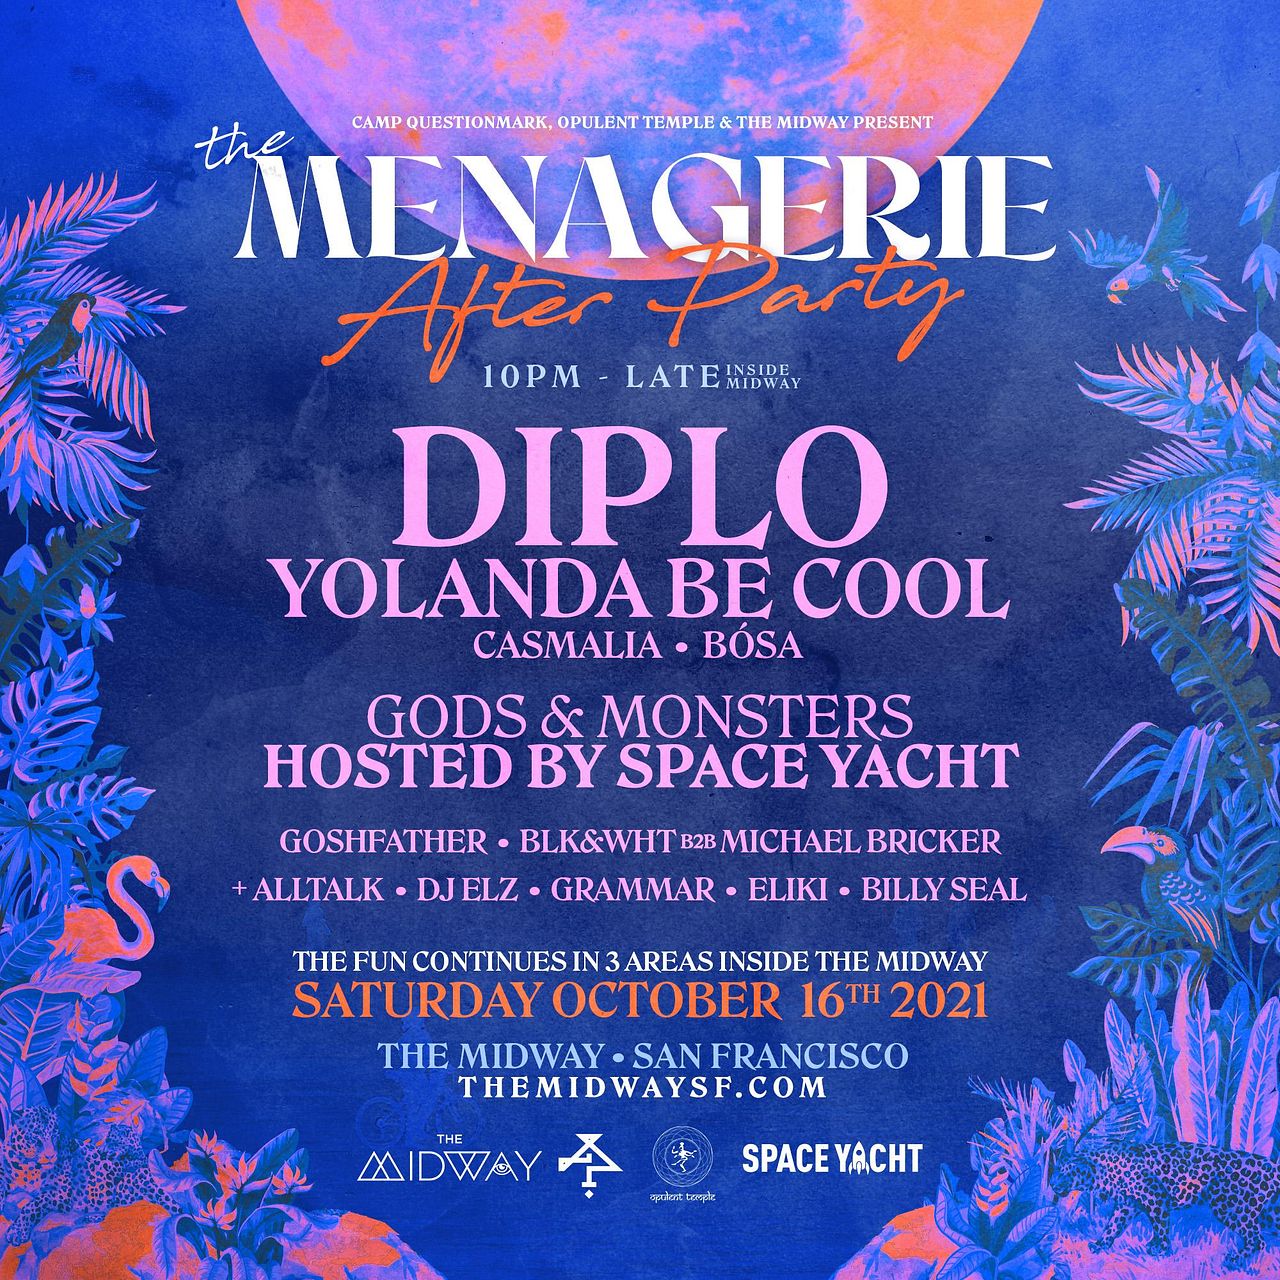 Menagerie After Hours with Diplo Tickets at The Midway in San Francisco